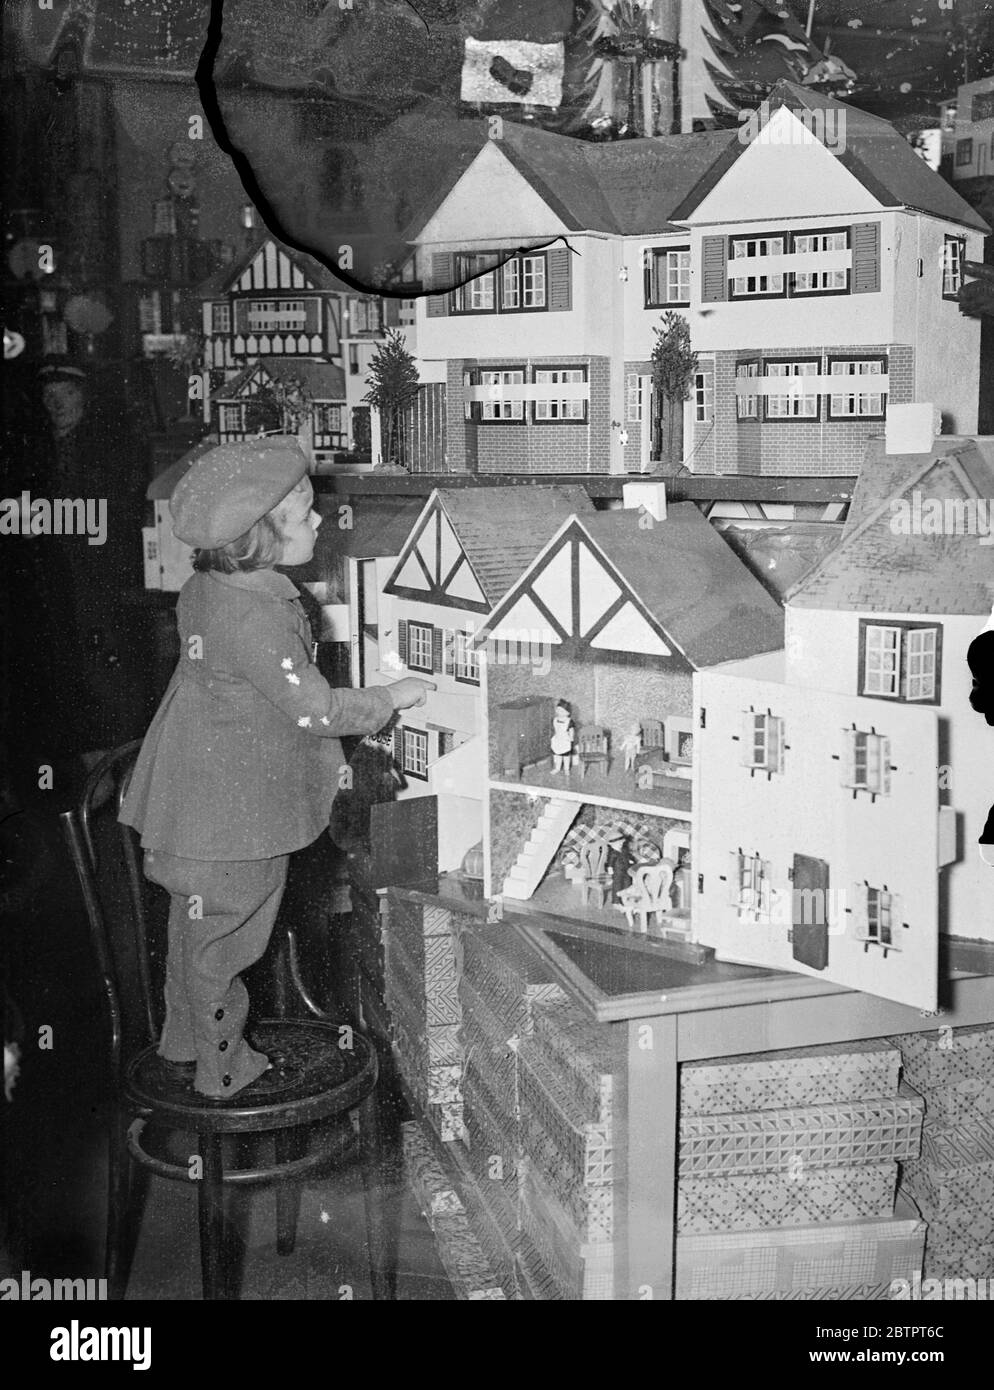 Dream come true!. Standing tiptoe on a convenient chair, this small visitor eagerly chooses her dolls house from the Christmas fair at Gamages, in Holborn. 19 November 1937 Stock Photo